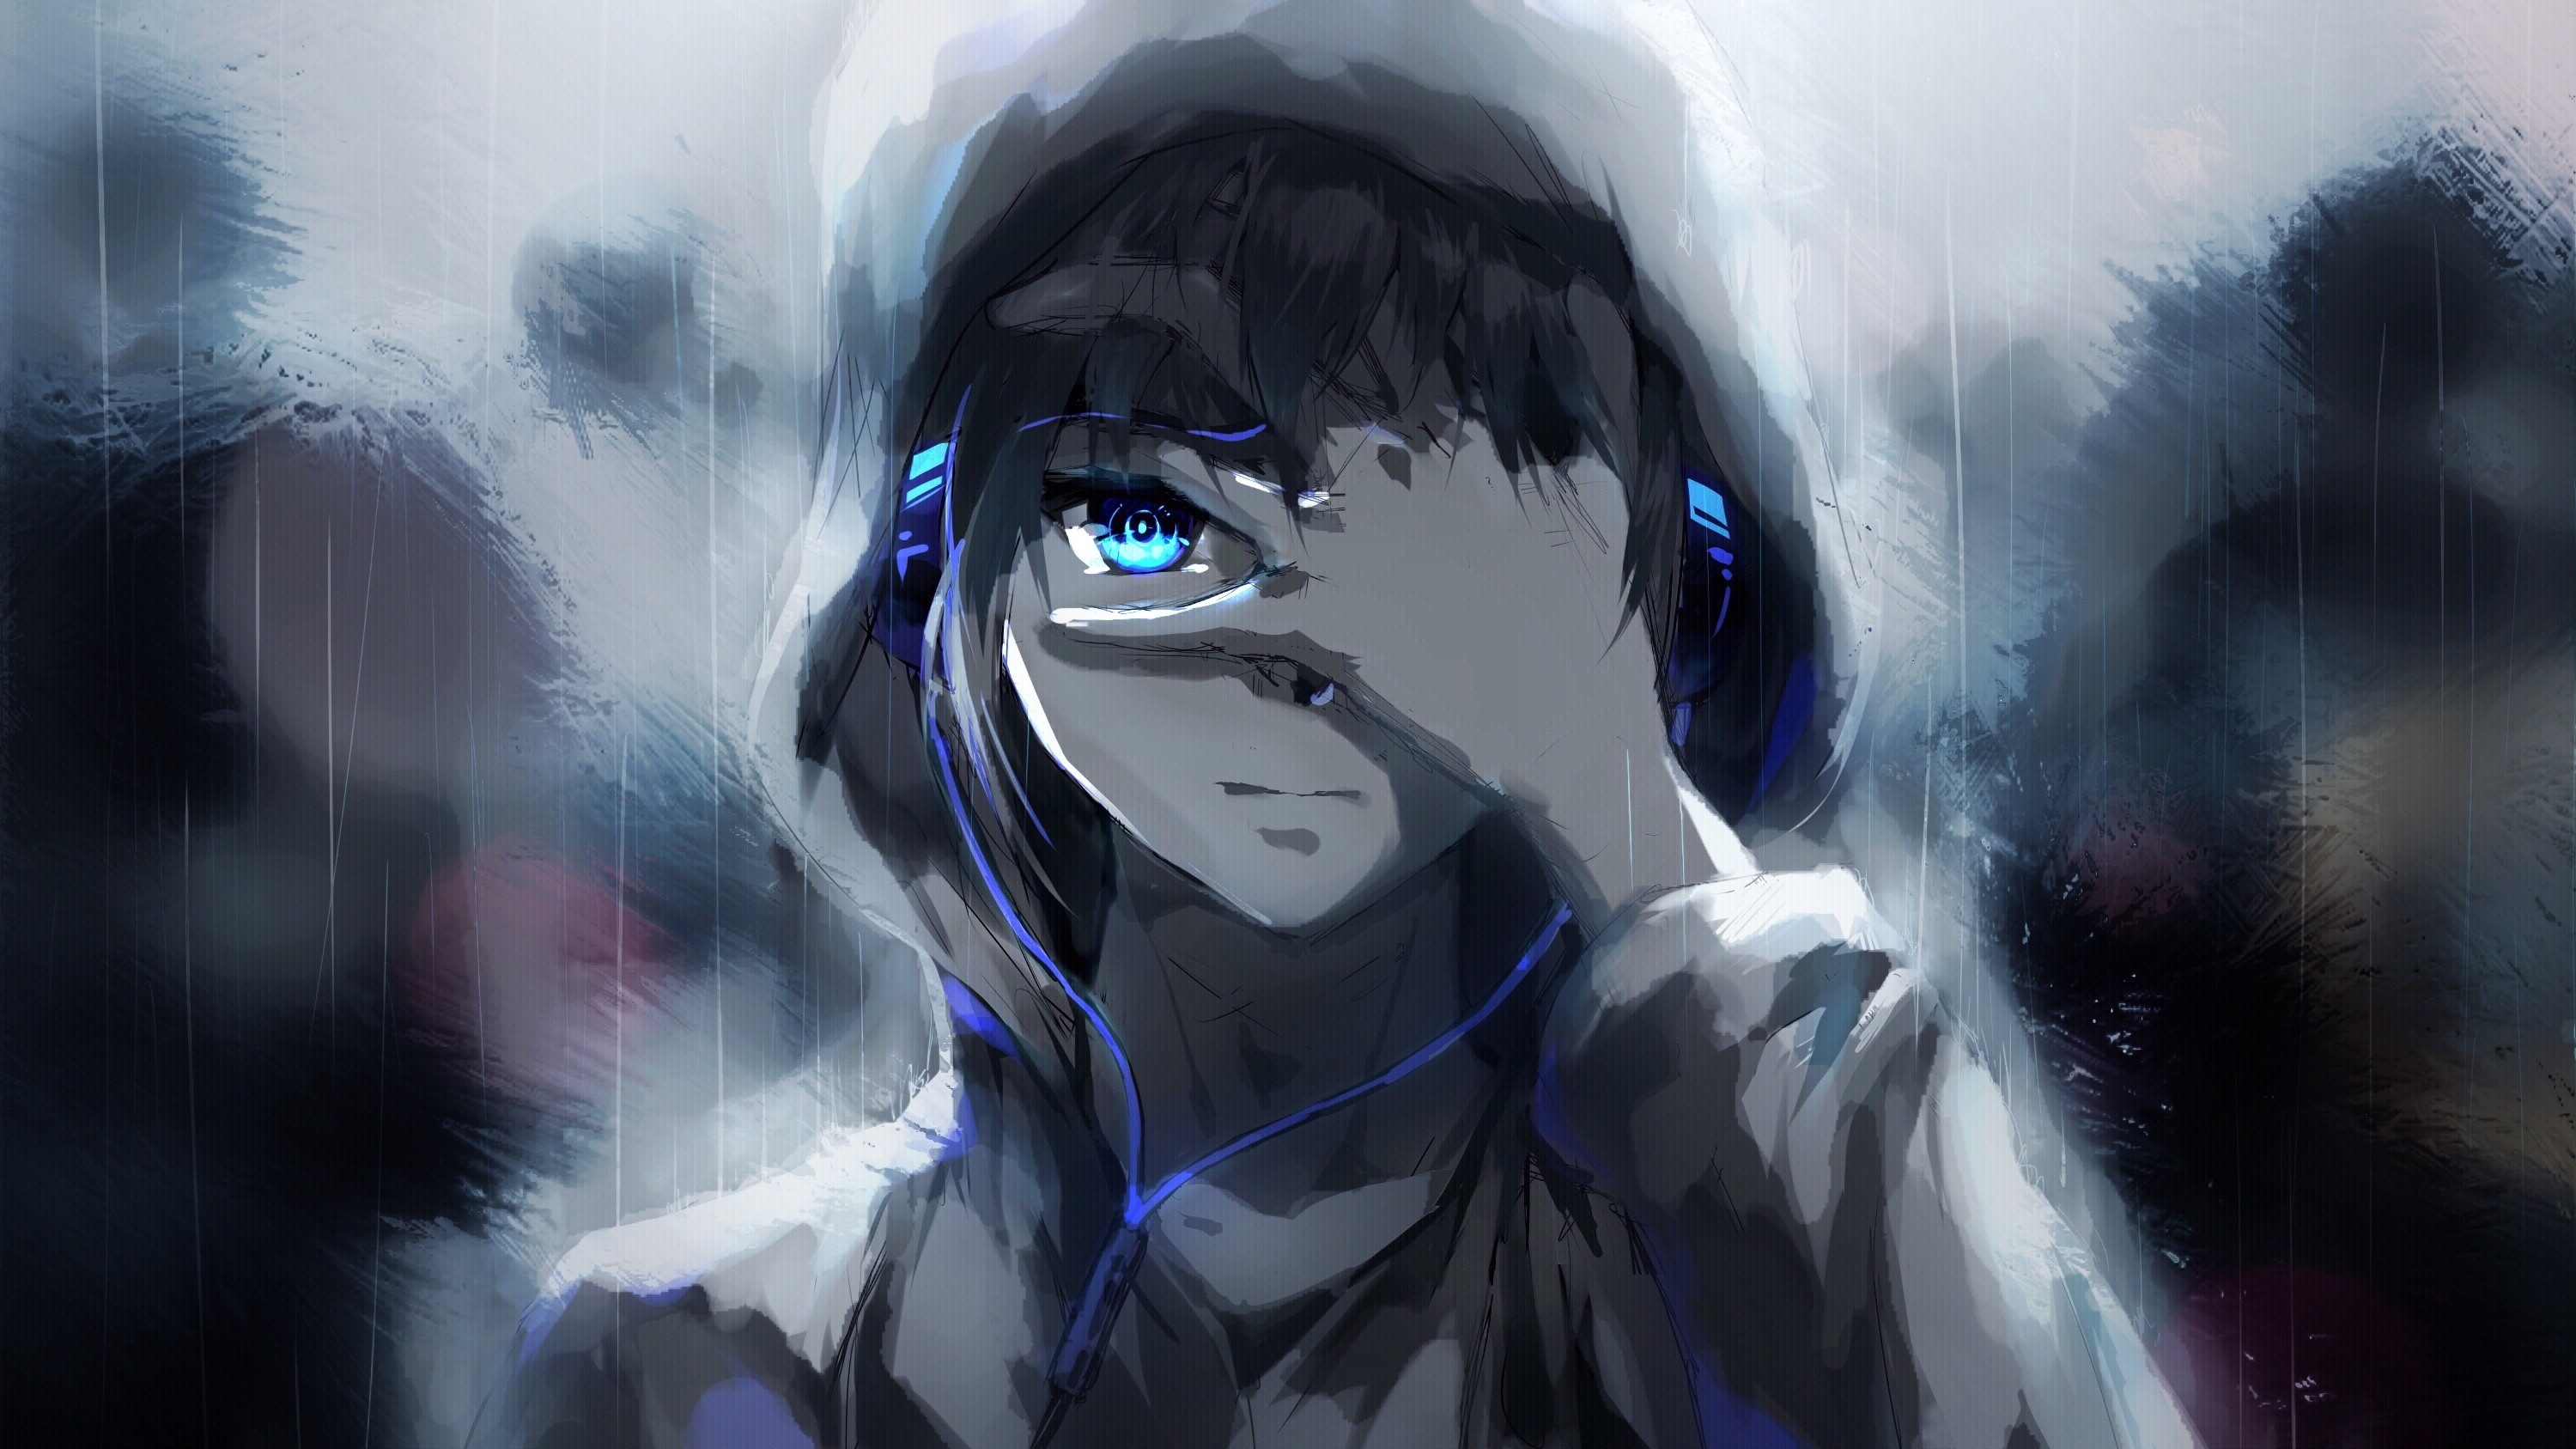 Anime boy with blue hair and headphones art - wide 8